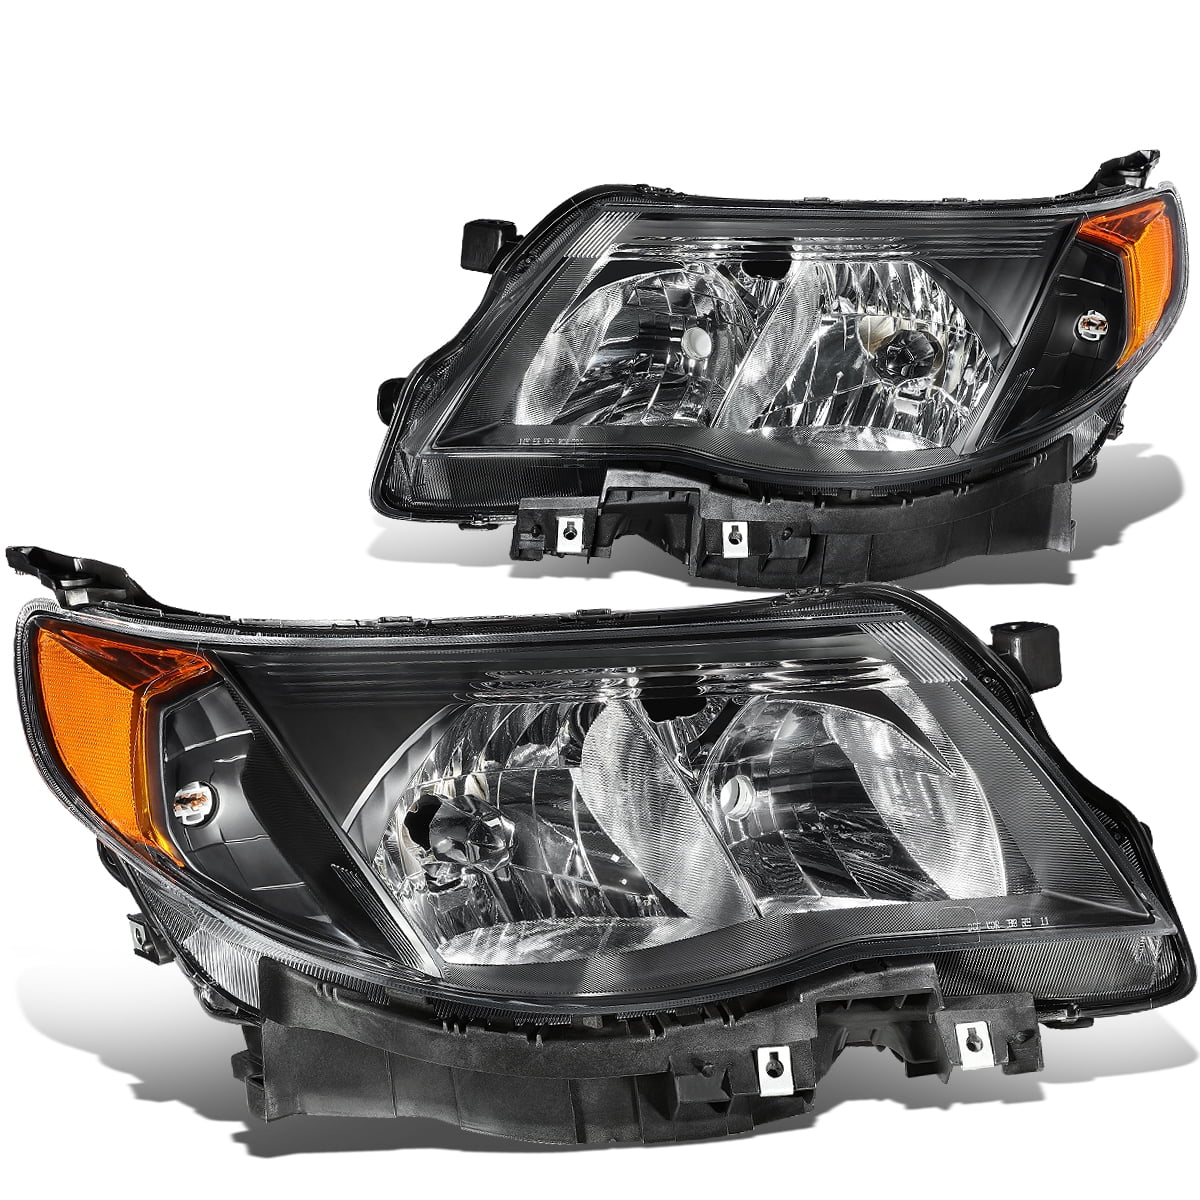 DNA MOTORING HL-OH-088-CH-AM Toyota Camry Headlight Assembly Driver And Passenger Side 